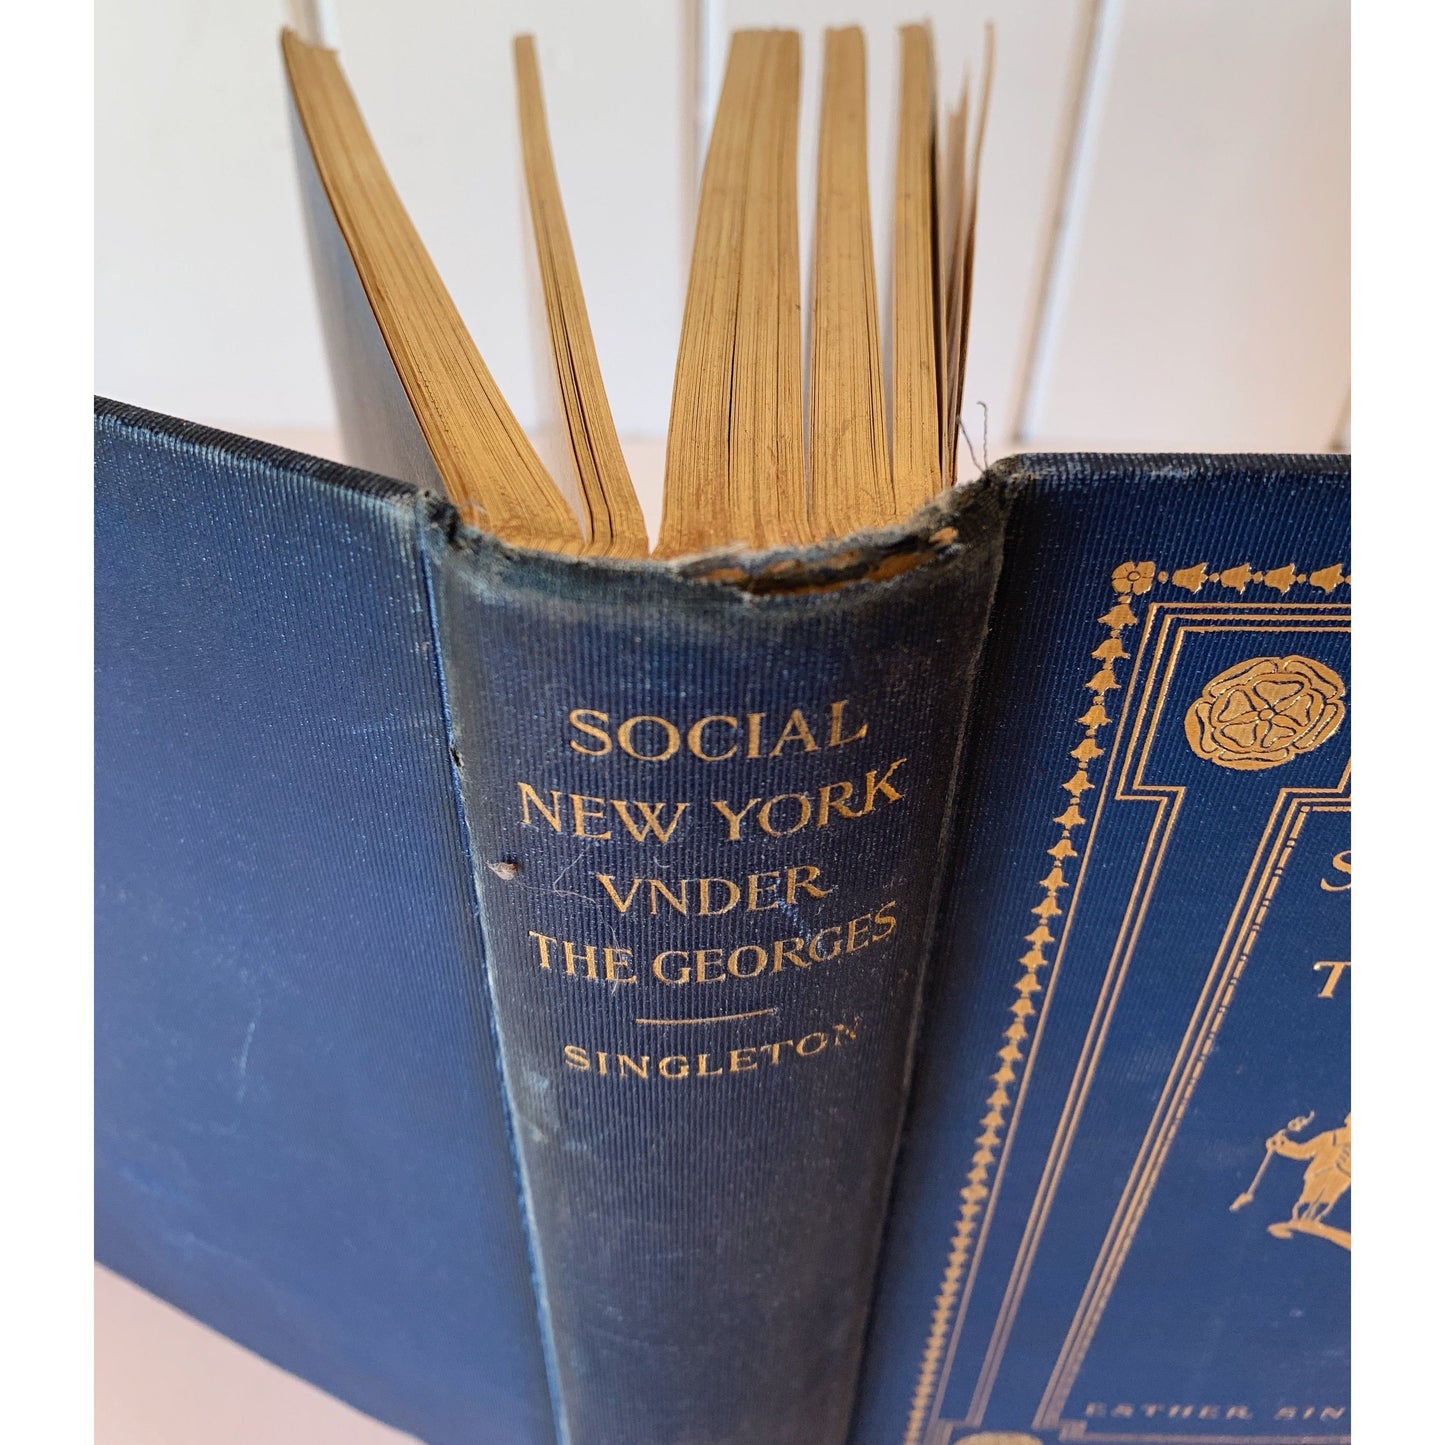 Social New York Under the Georges 1714-1776, Hardcover 1902